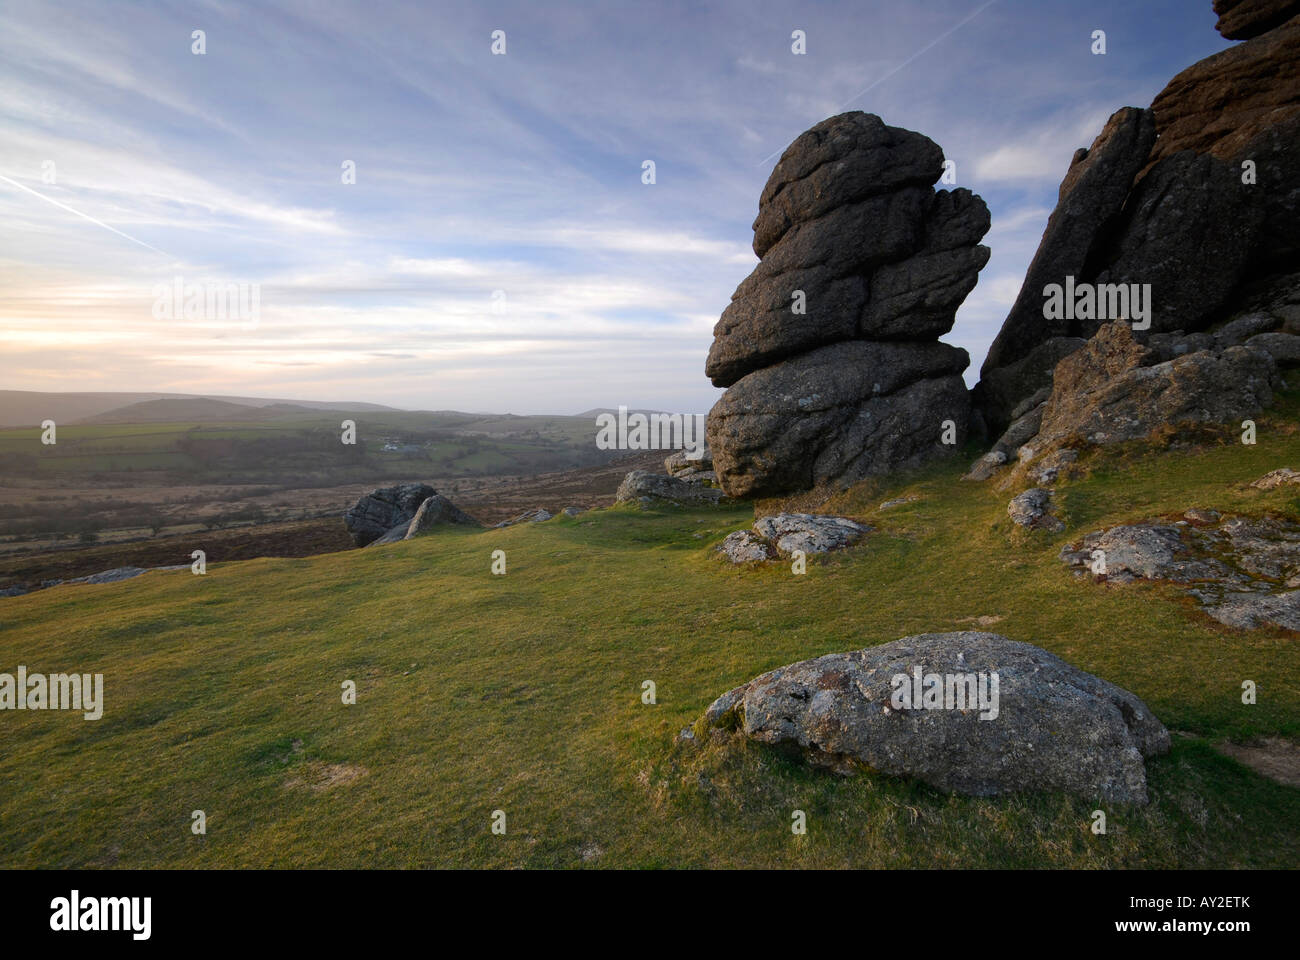 View of rock formation at Saddle Tor, Dartmoor, England, near sunset. Stock Photo